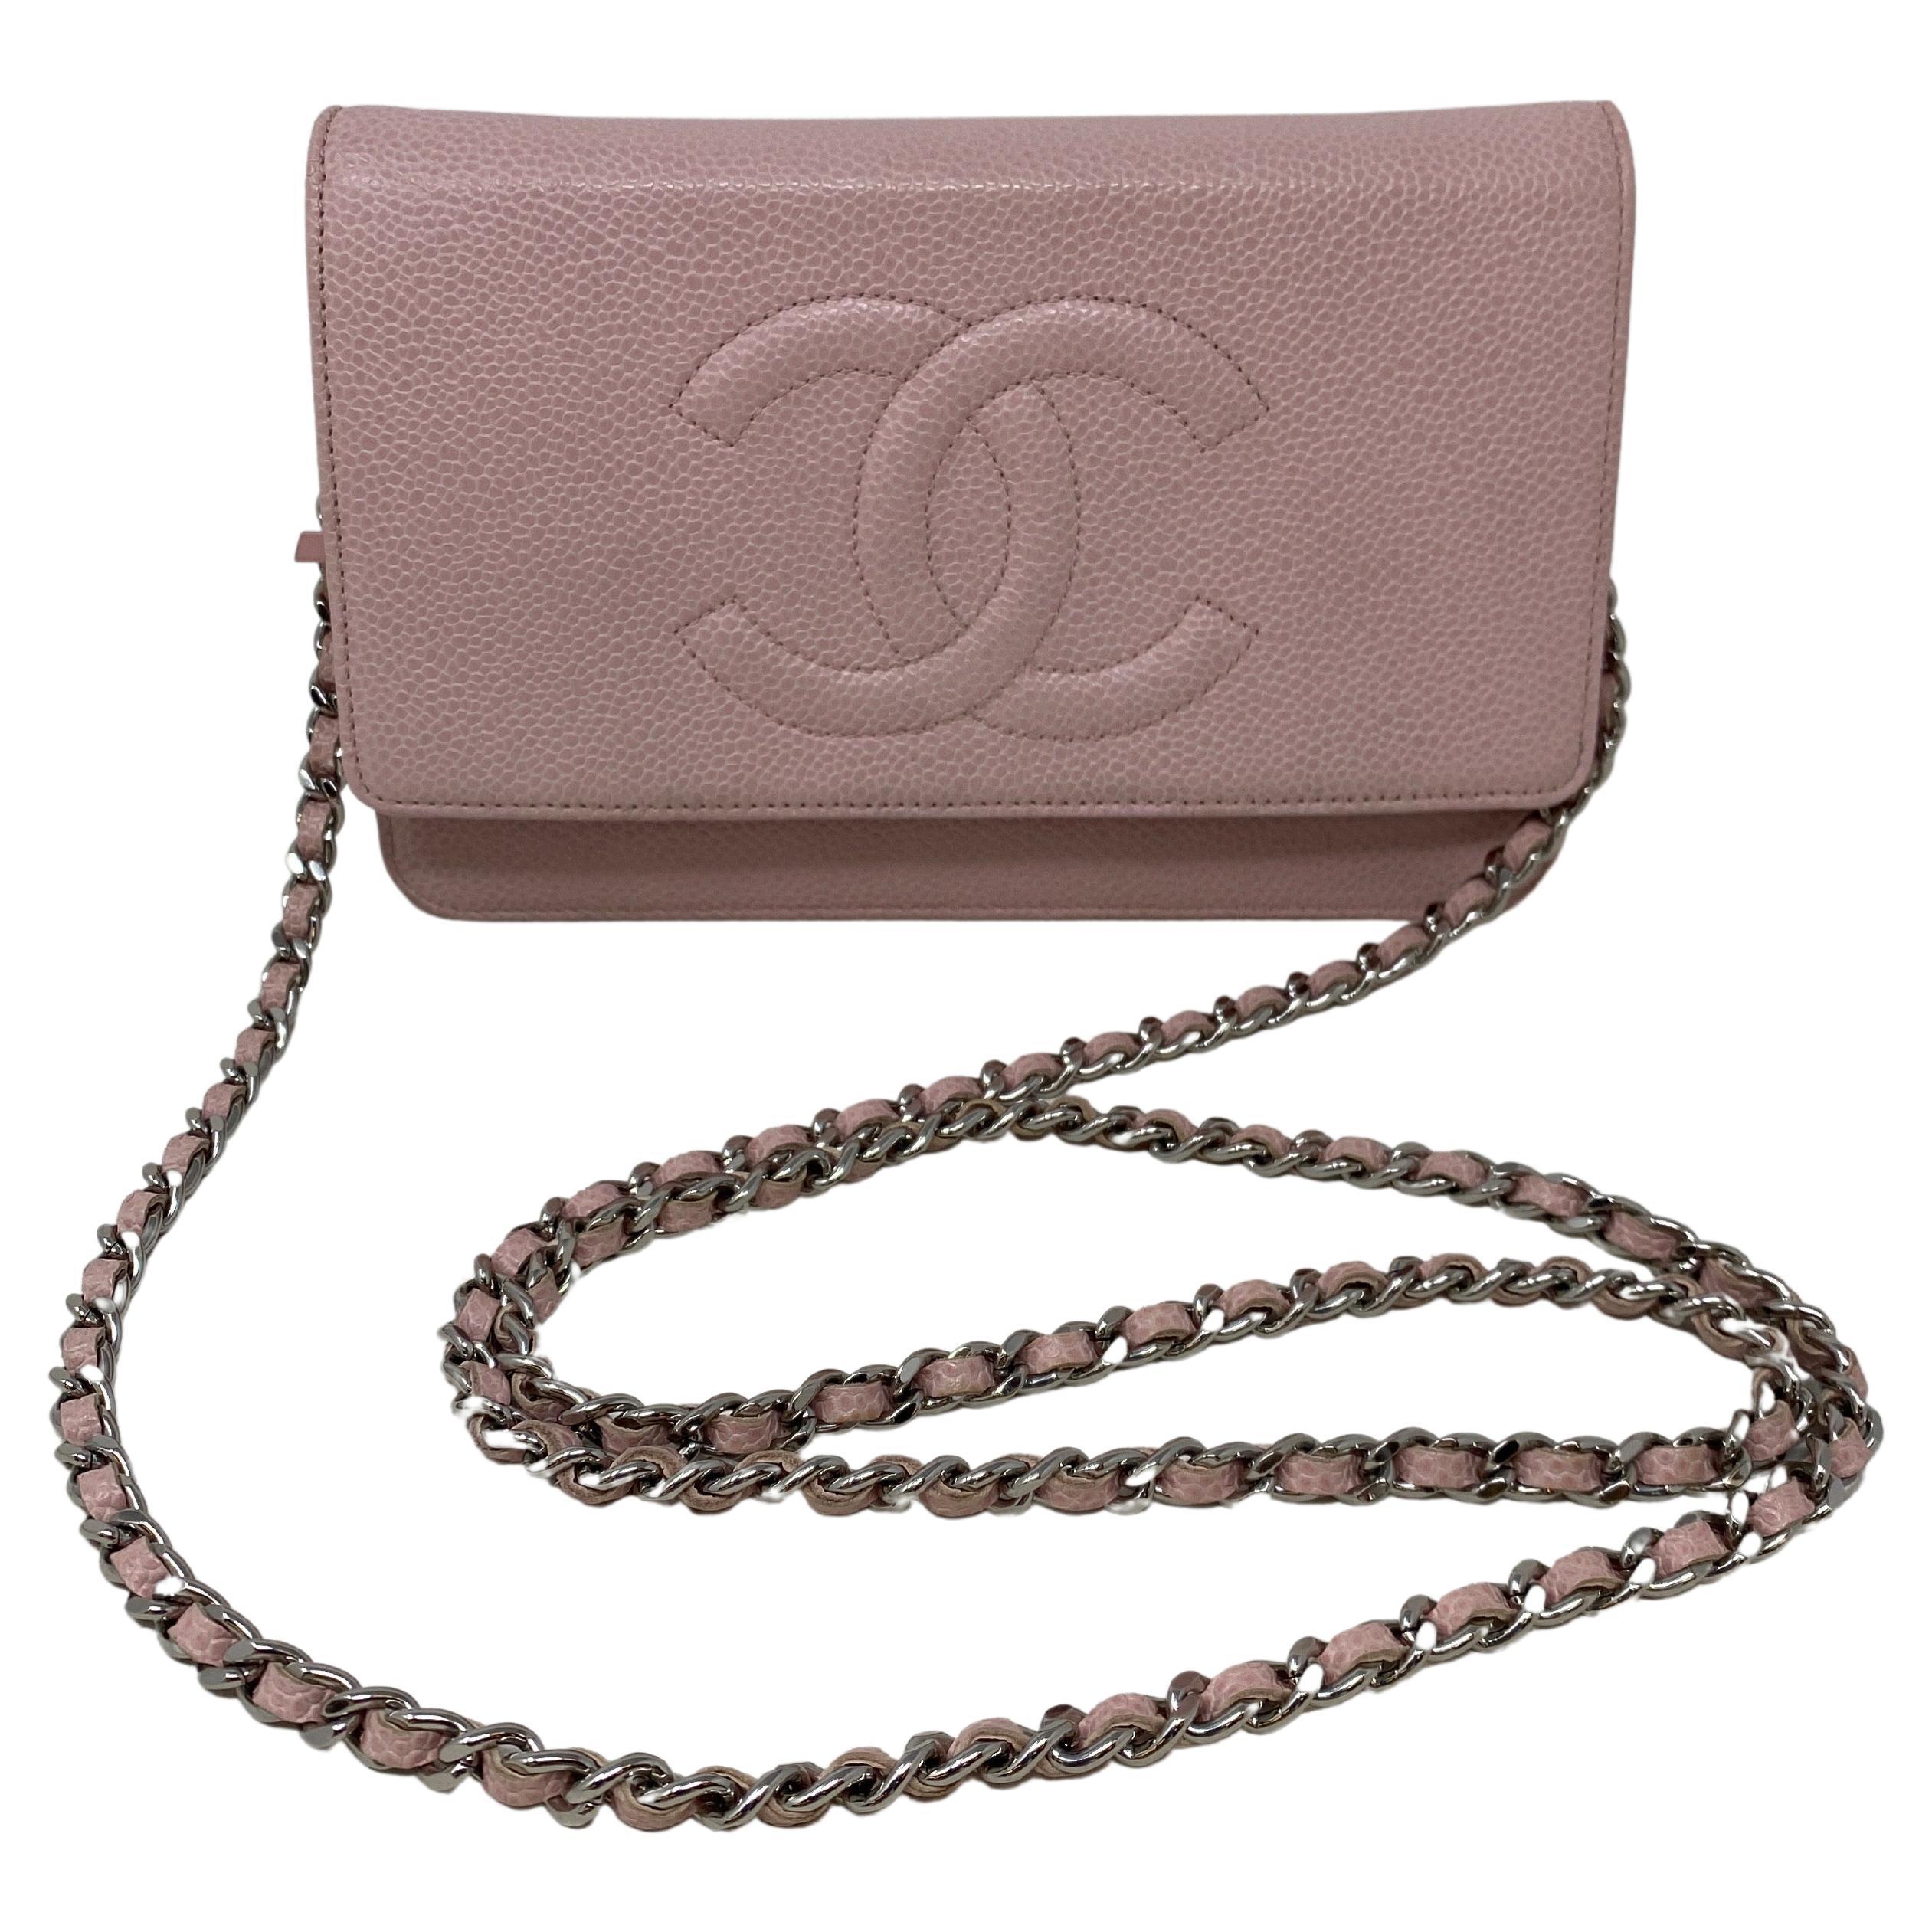 Chanel Light Pink Wallet On A Chain Bag 